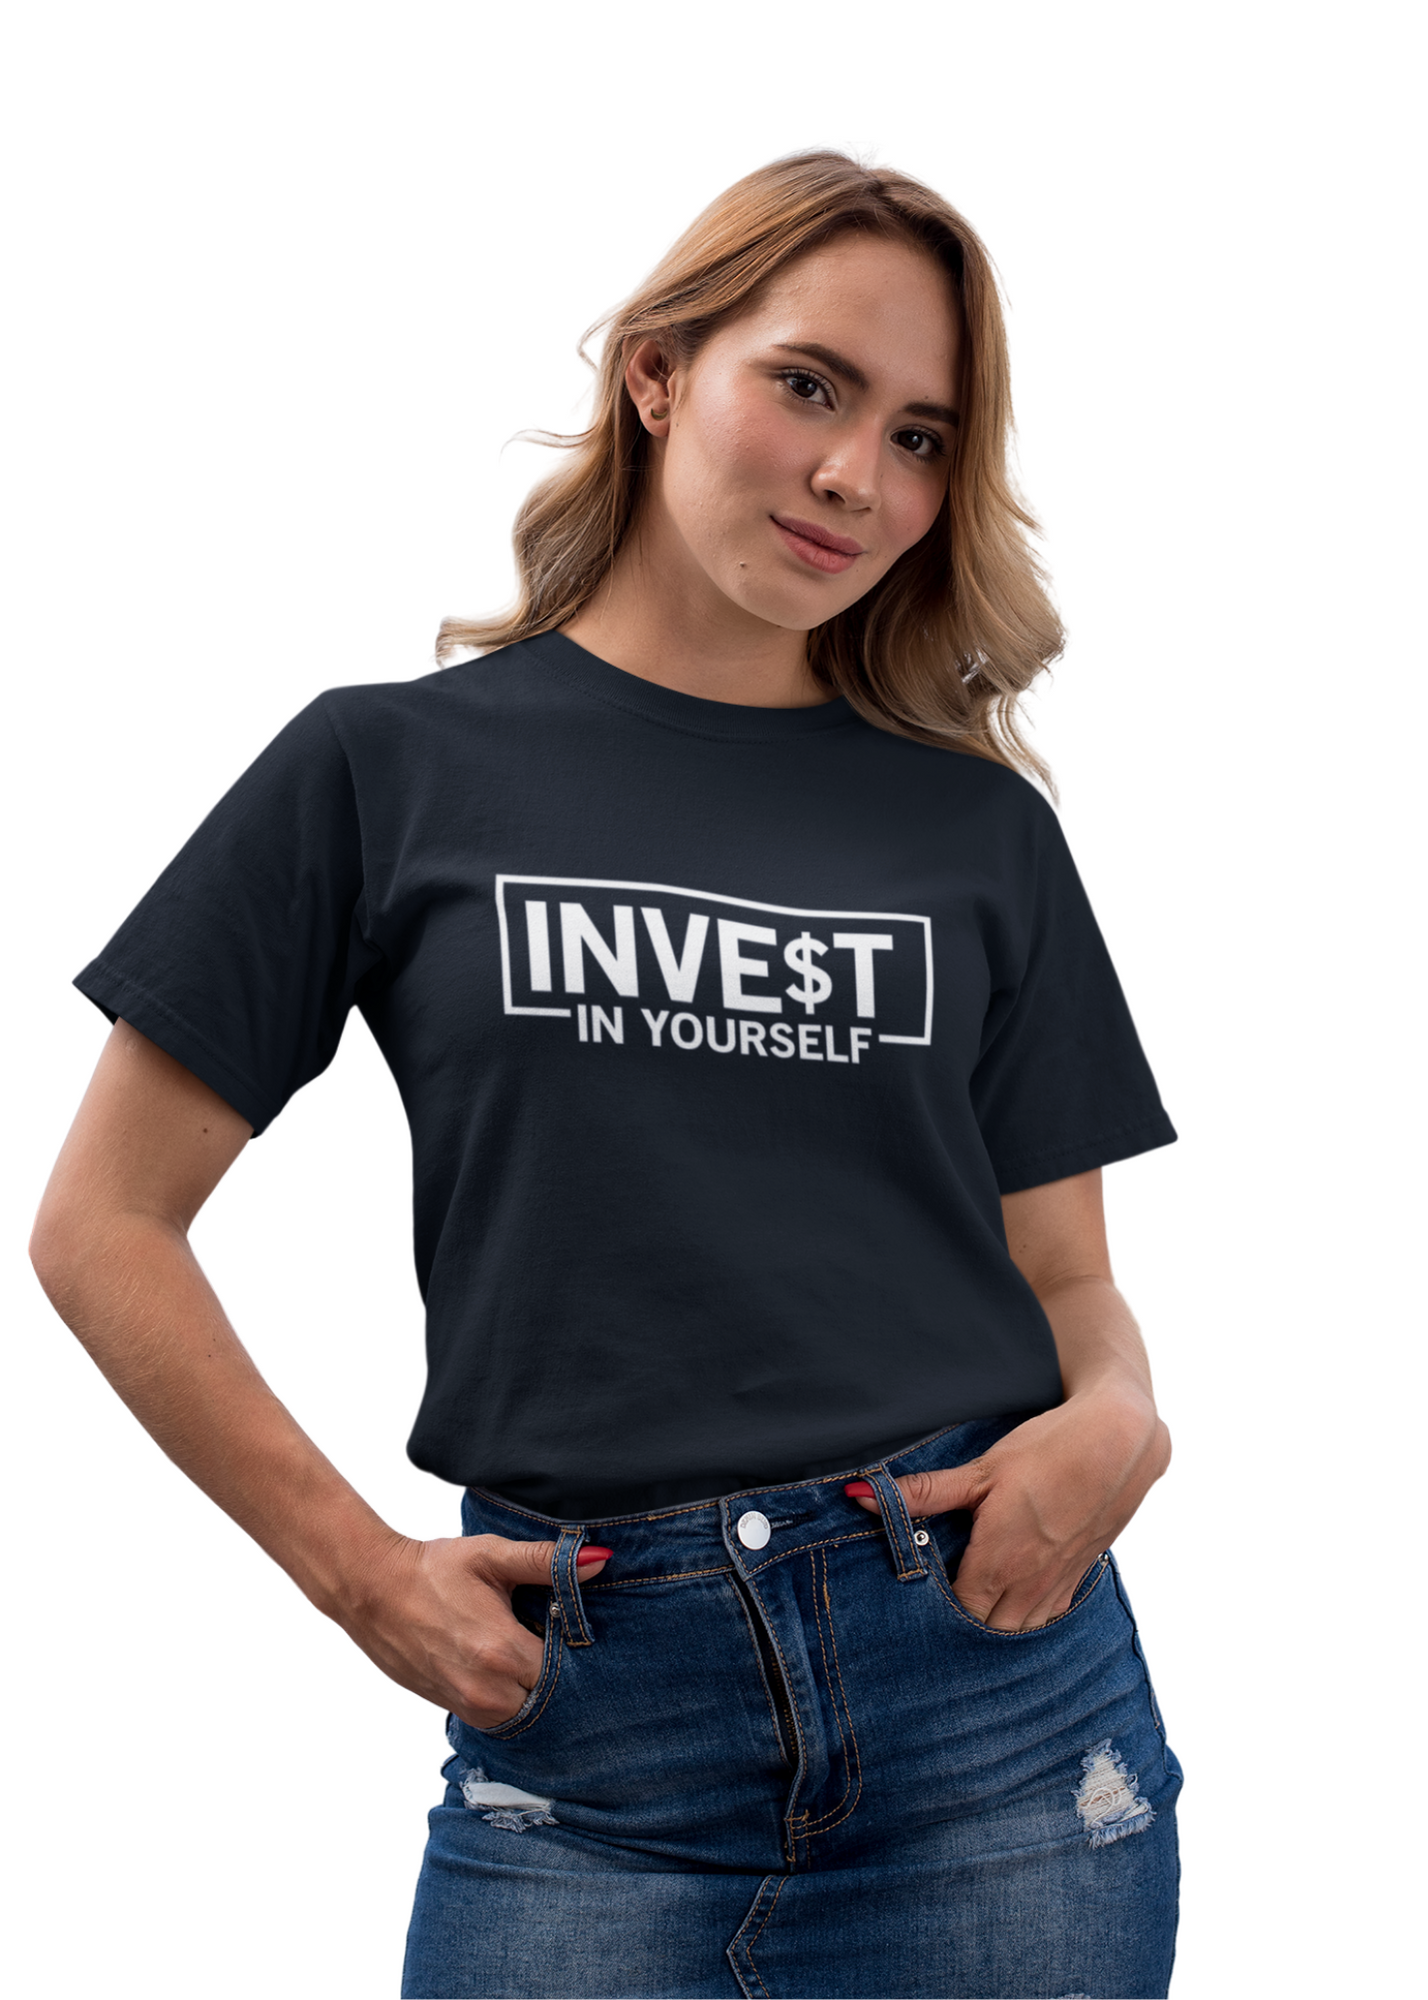 INVEST IN YOURSELF WOMEN'S SHORT SLEEVE T-SHIRT